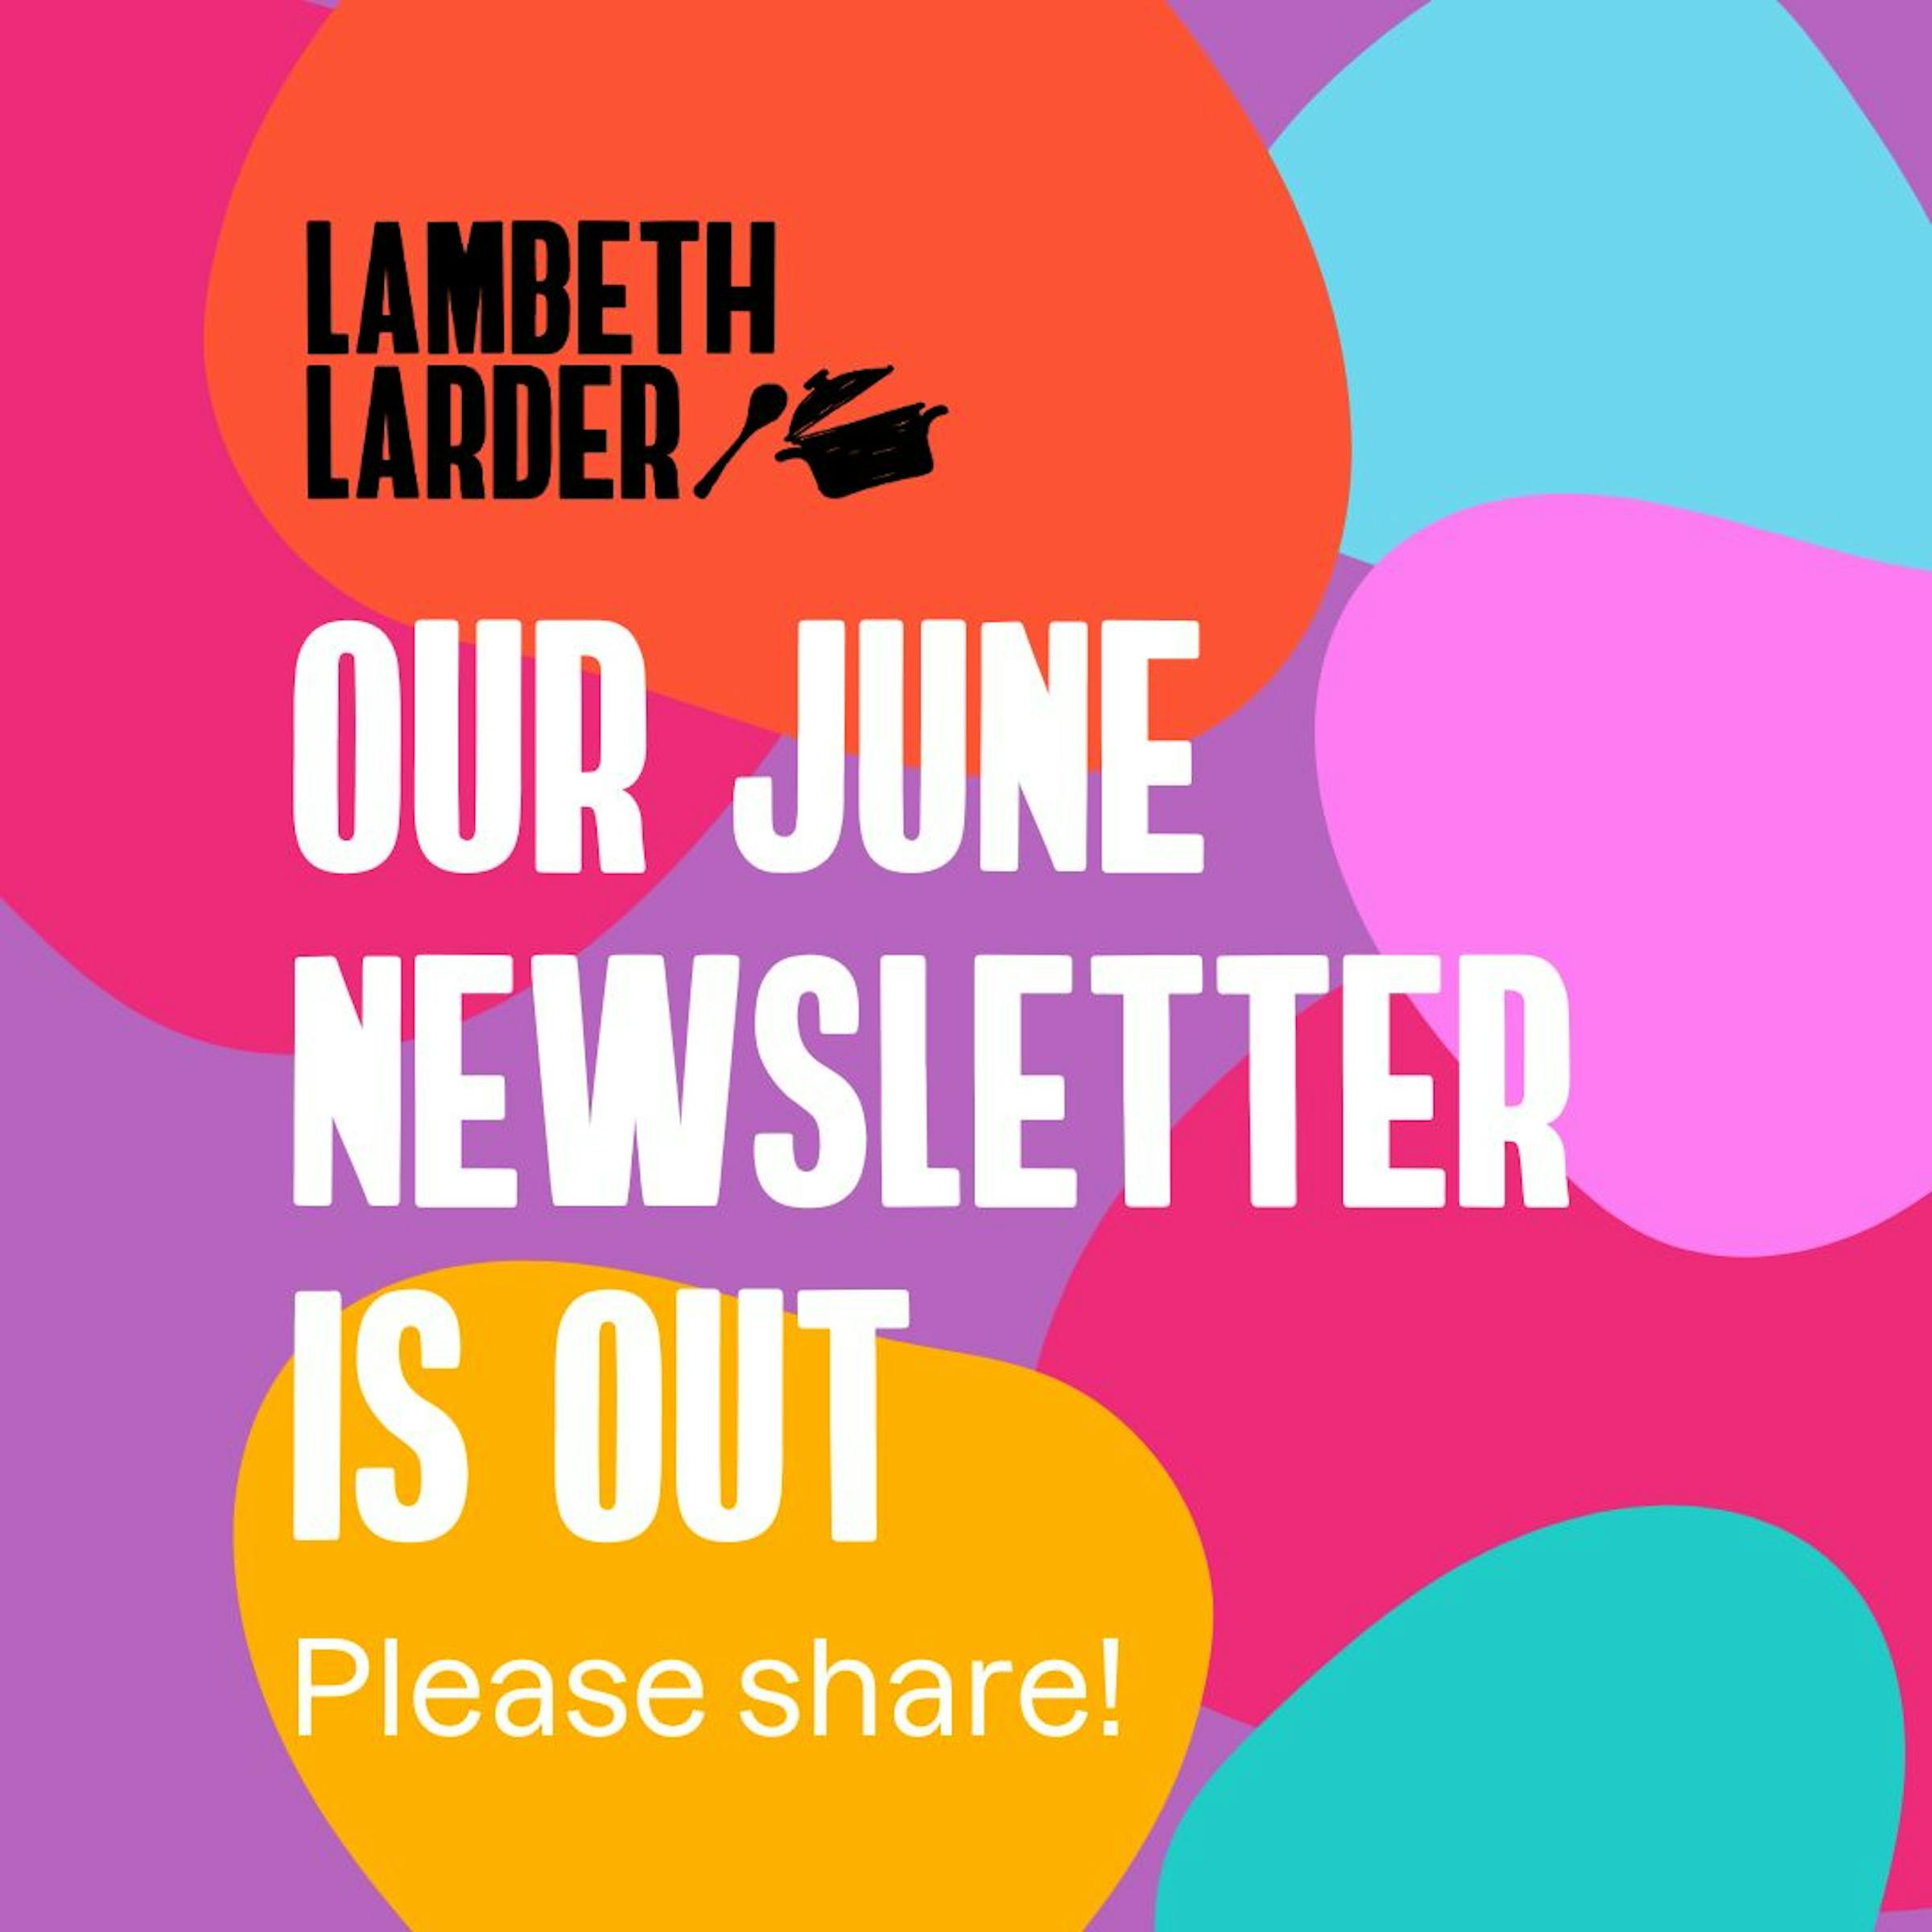 June Newsletter is out!